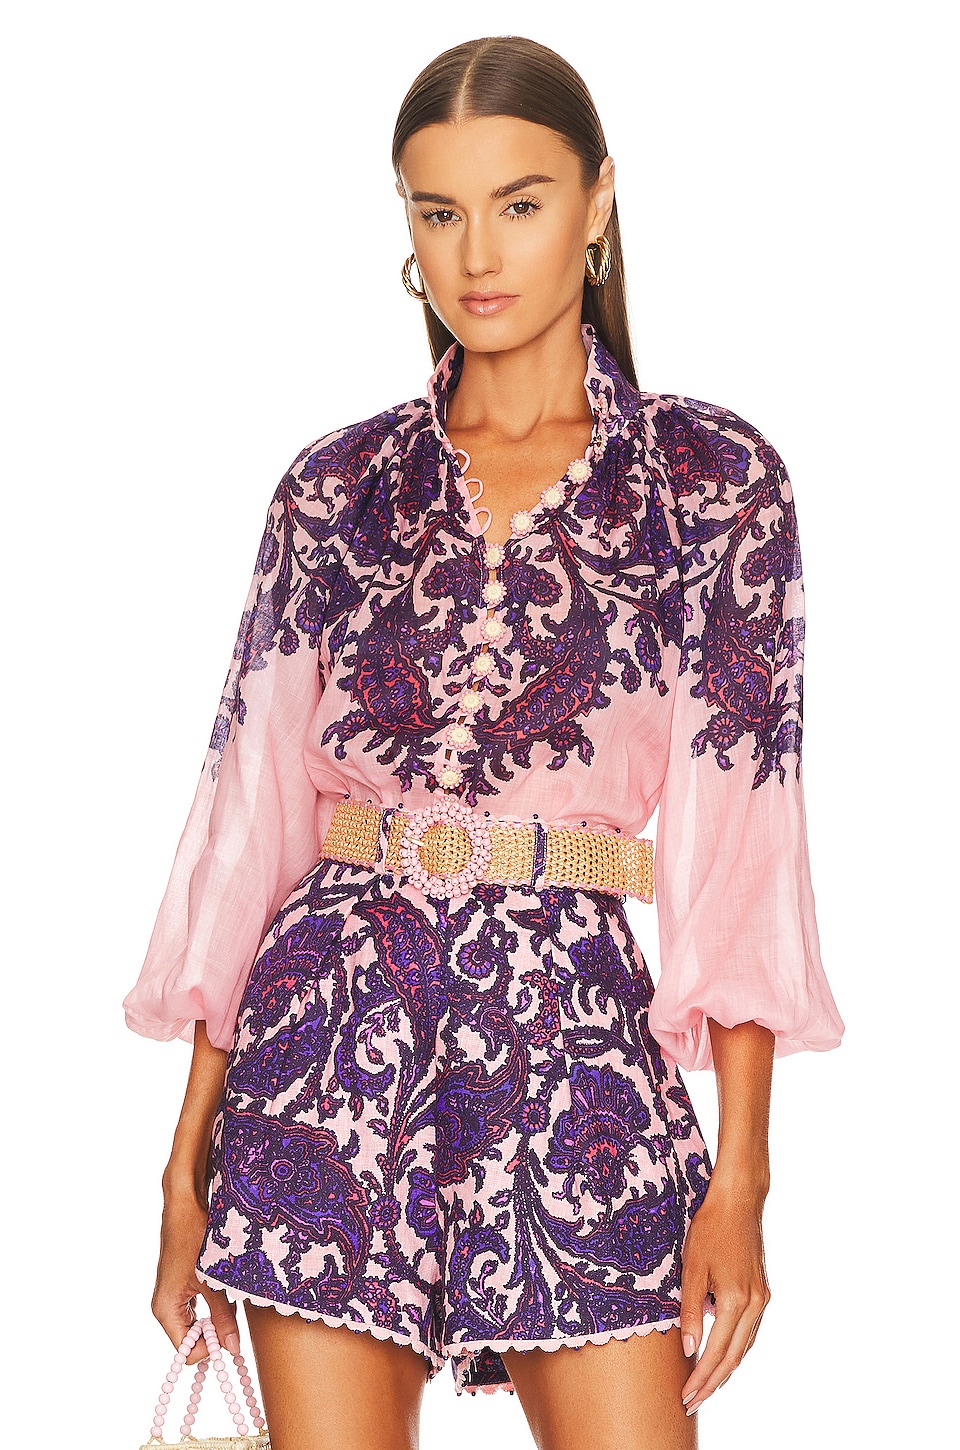 Zimmermann Tiggy Billow Blouse in Lilac & Pink Paisley | REVOLVE